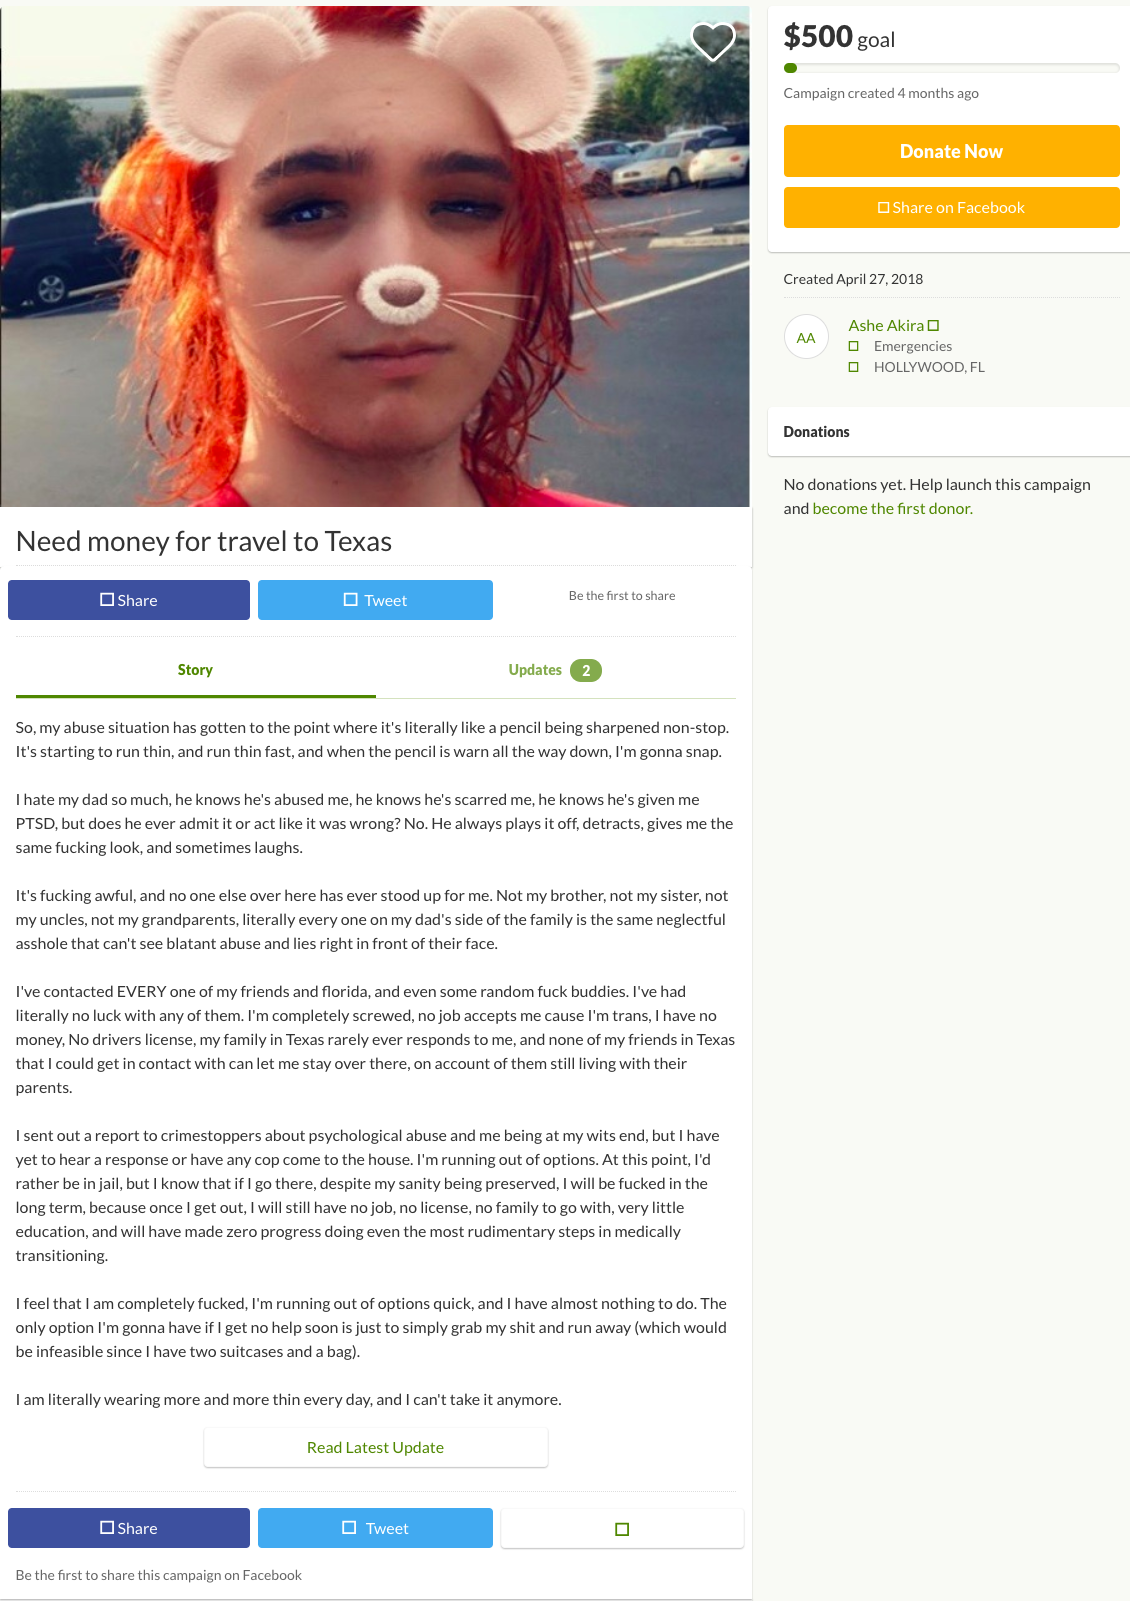 gofundfail.png